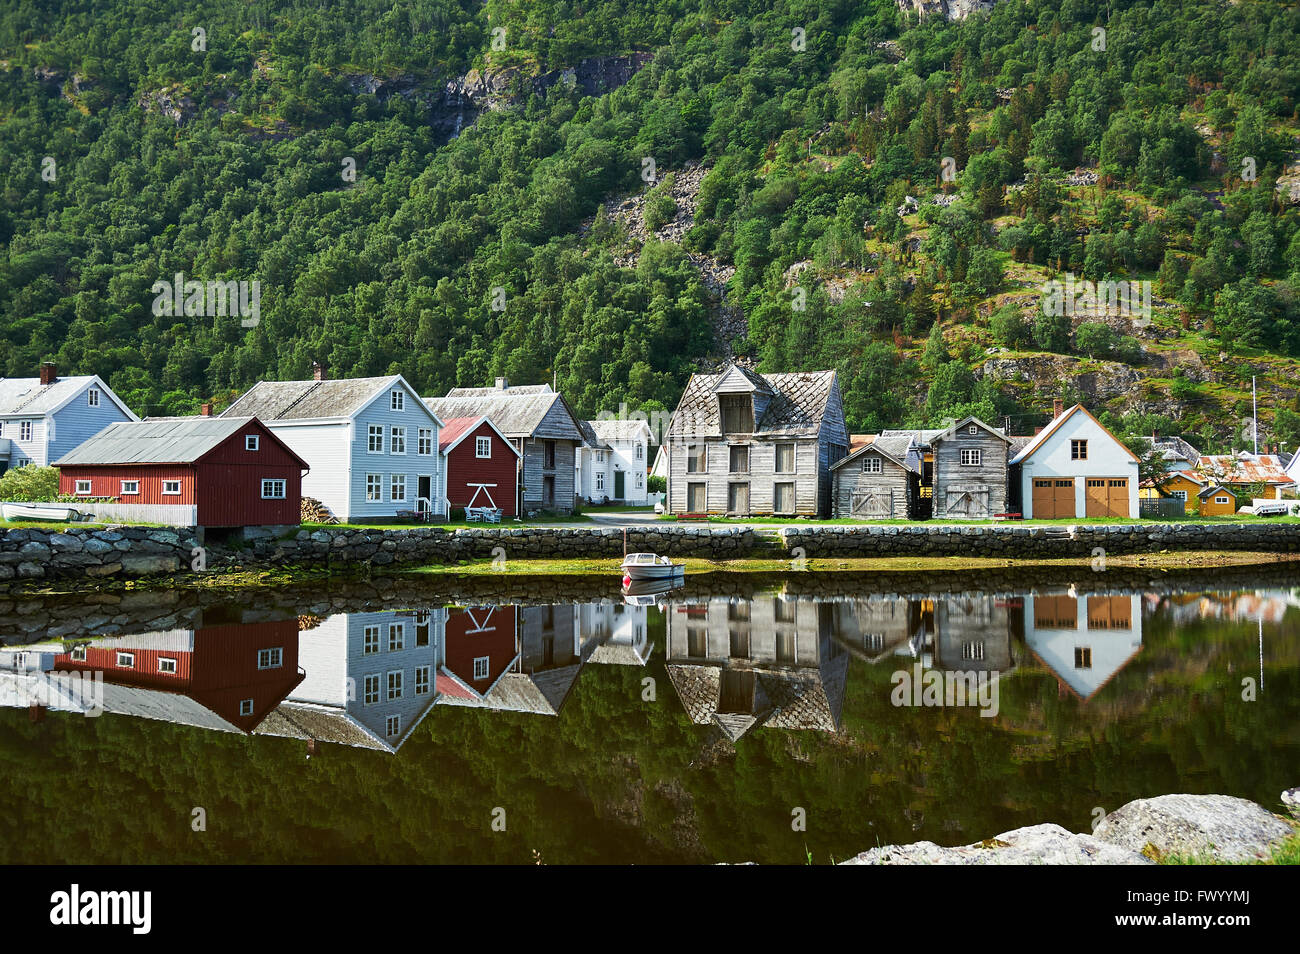 Shoreline Laerdal Norway historic village with old wood houses before the fire Stock Photo